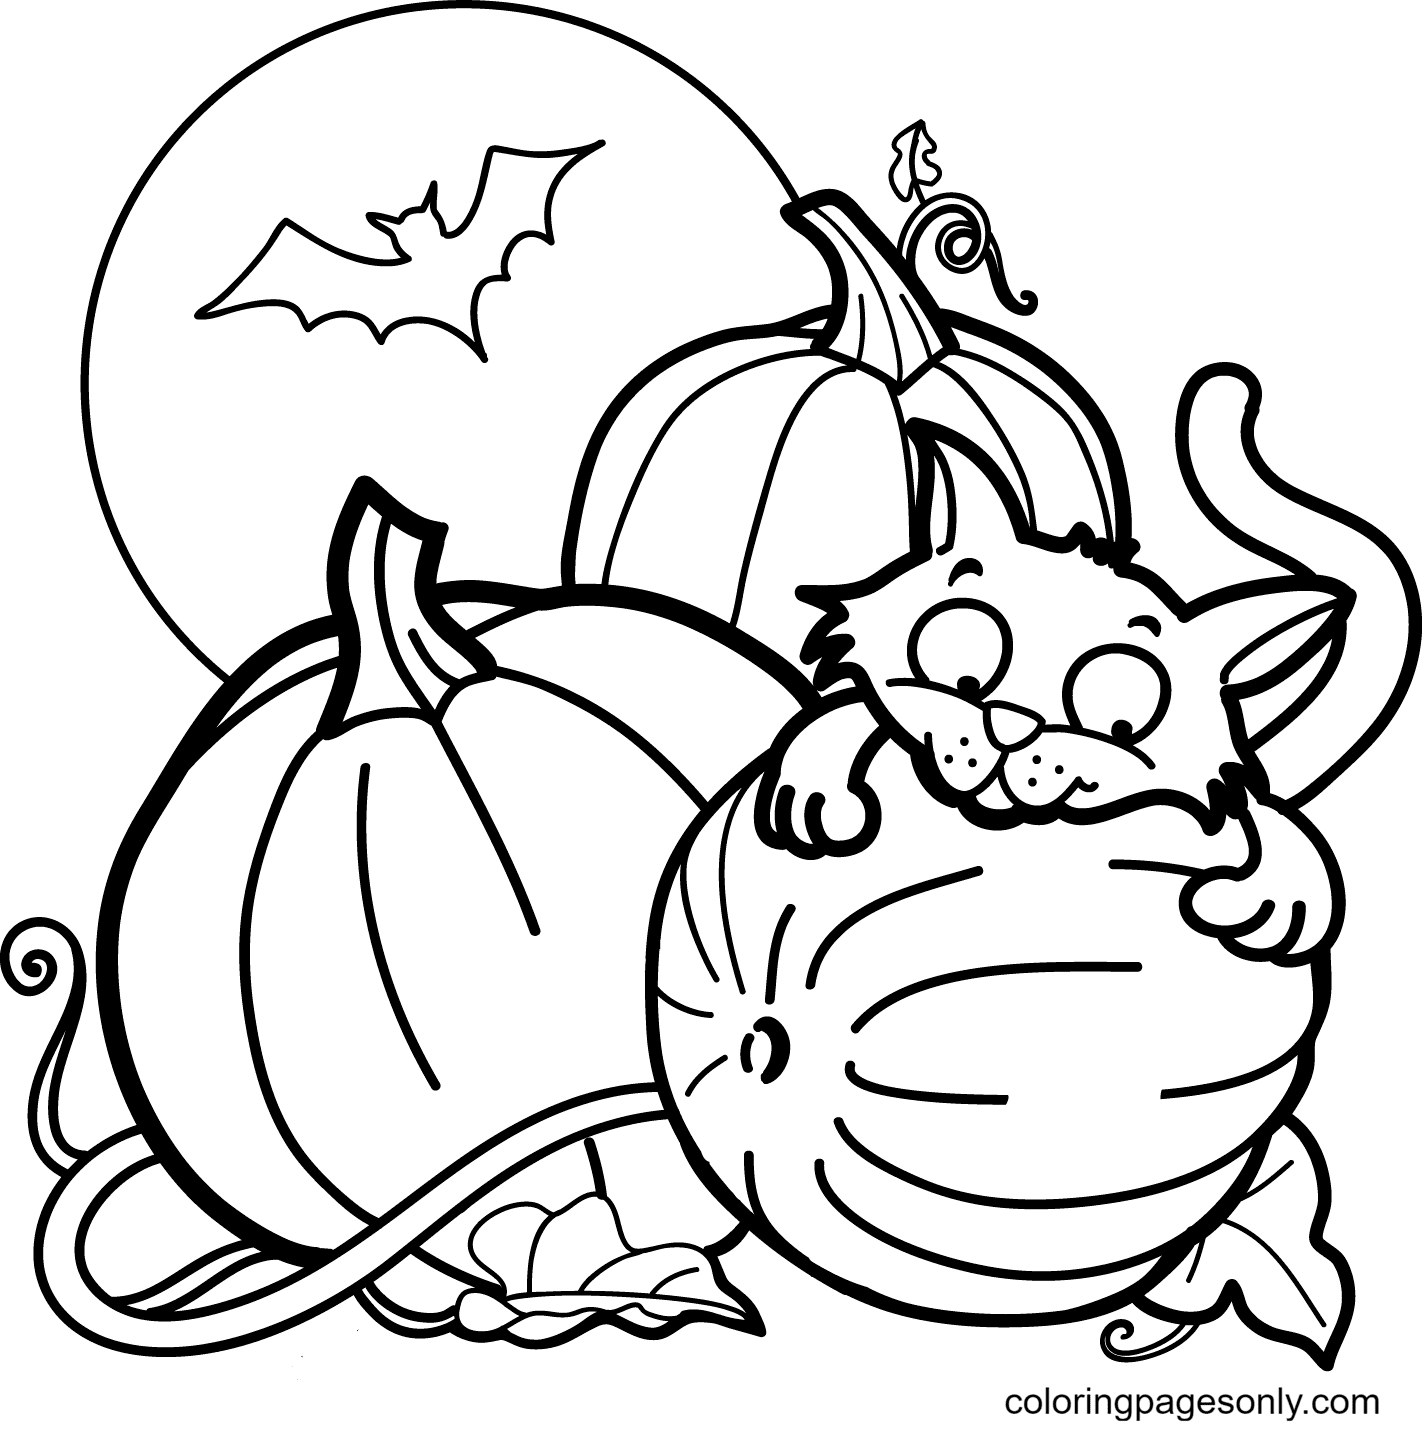 Cat, Pumpkin and a Bat for Halloween Coloring Page